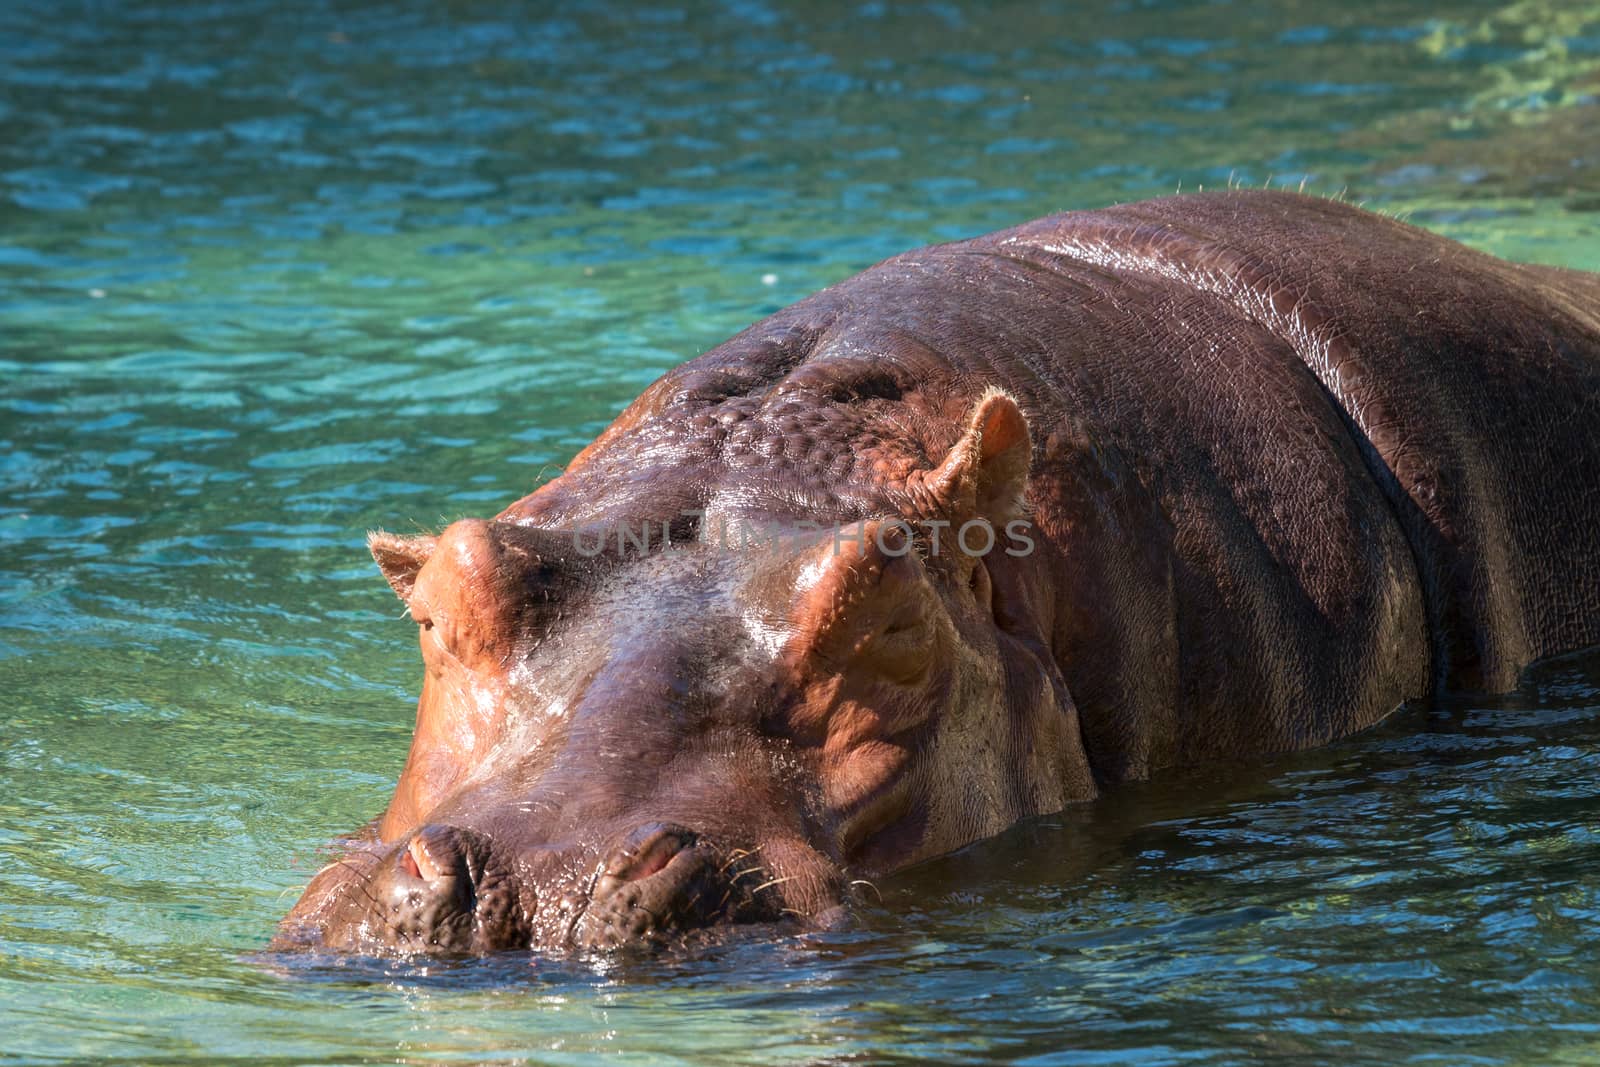 Hippo in water South Africa. Hippo in the water looking straight at the camera by mynewturtle1